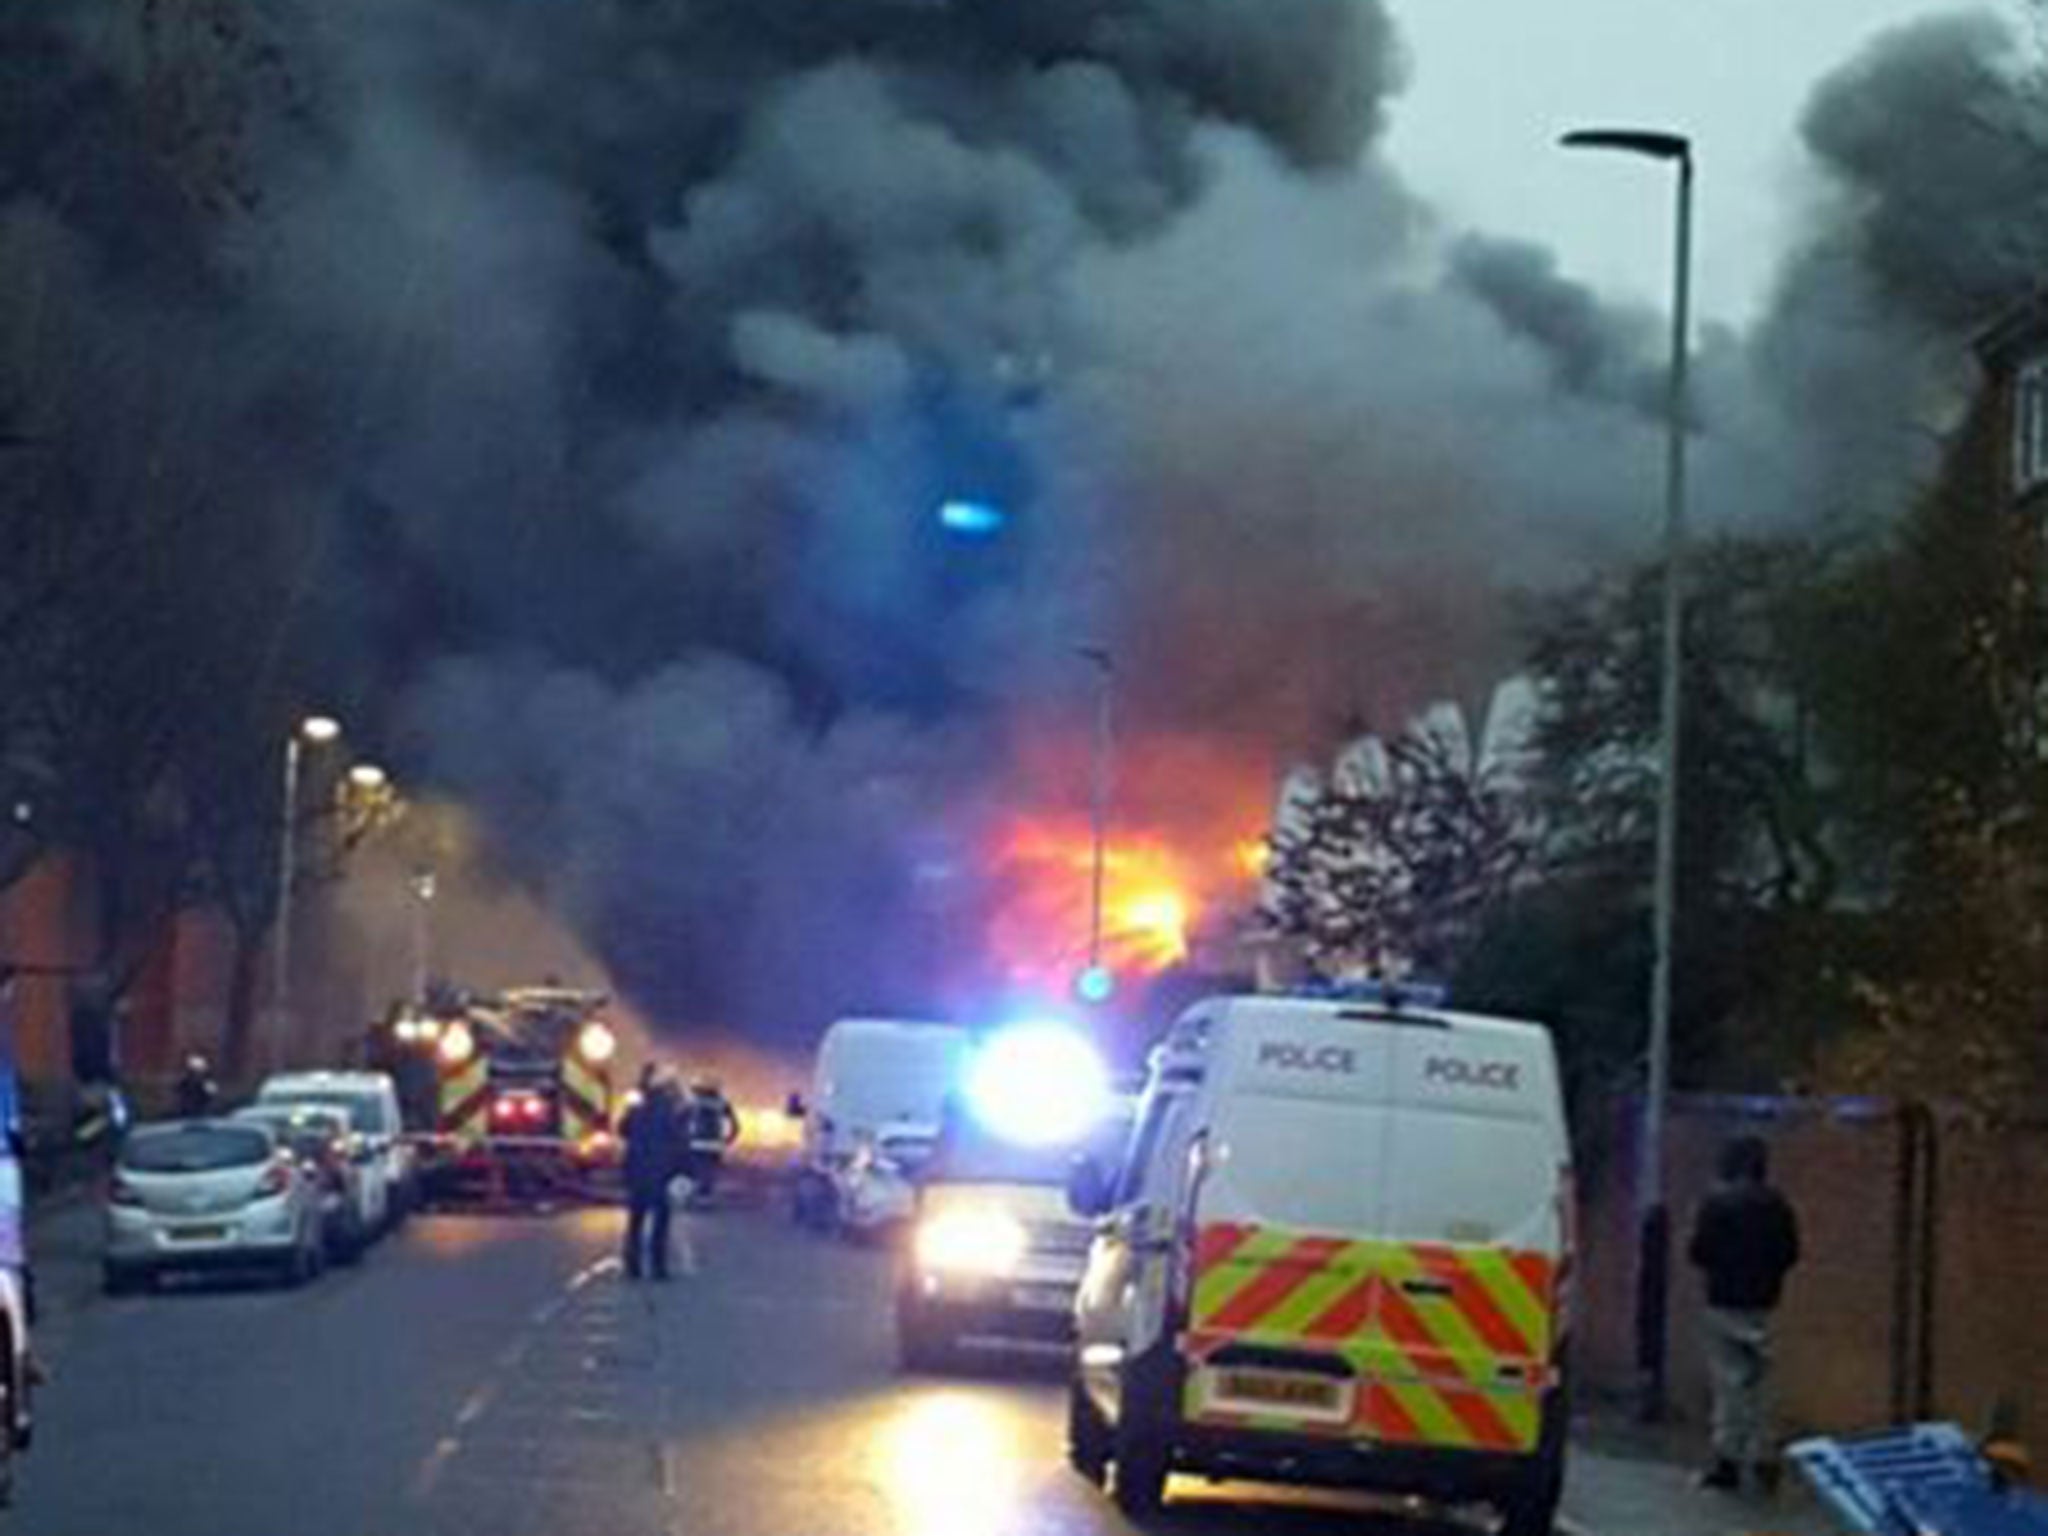 Pictures from the scene show plumes of thick smoke billowing into the air